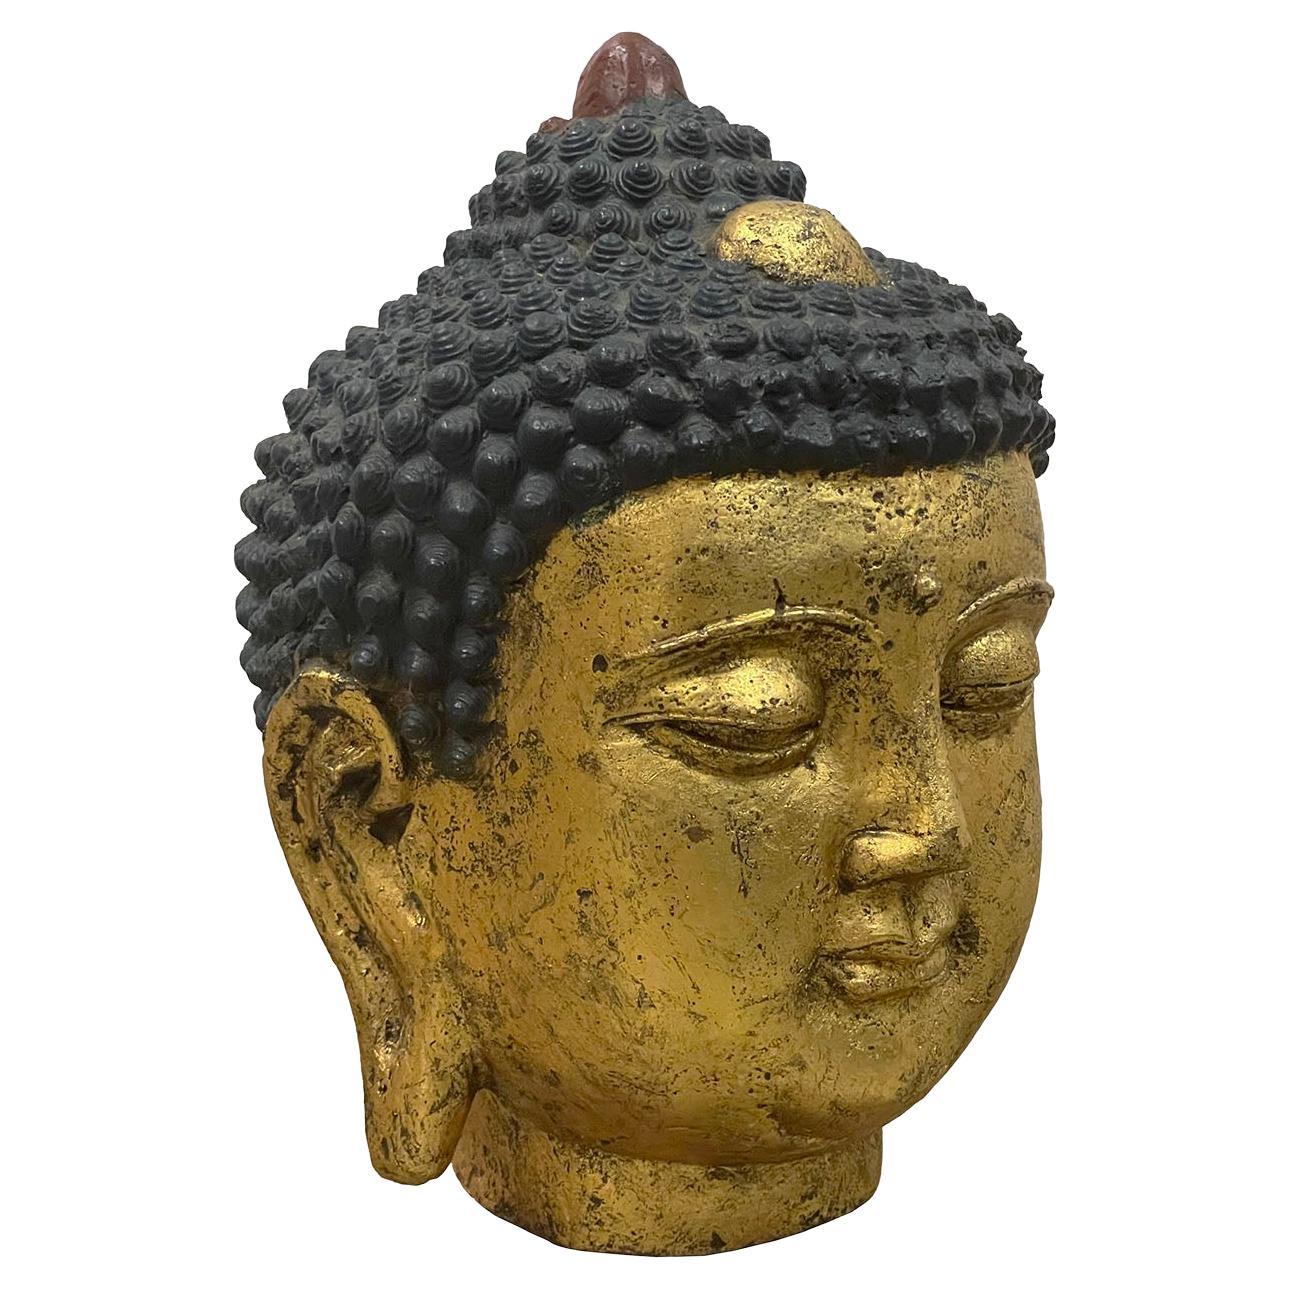 Early 20th Century Chinese Antique Gilt Metal Buddha Head